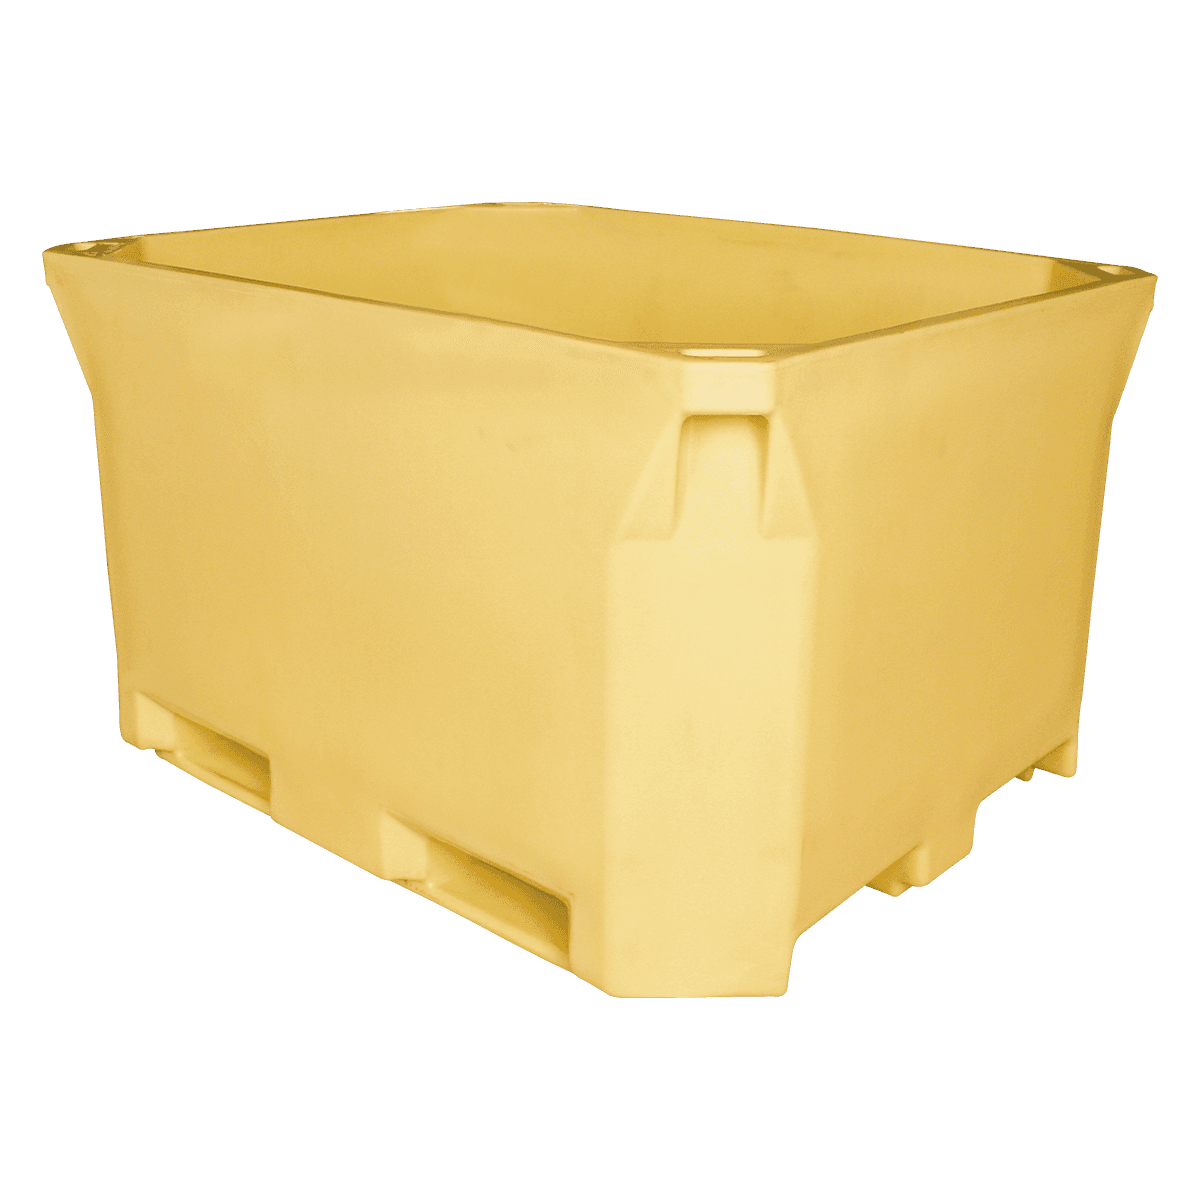 CF-1000L Plastic Fish Totes Seafood Industrial Use Plastic Containers